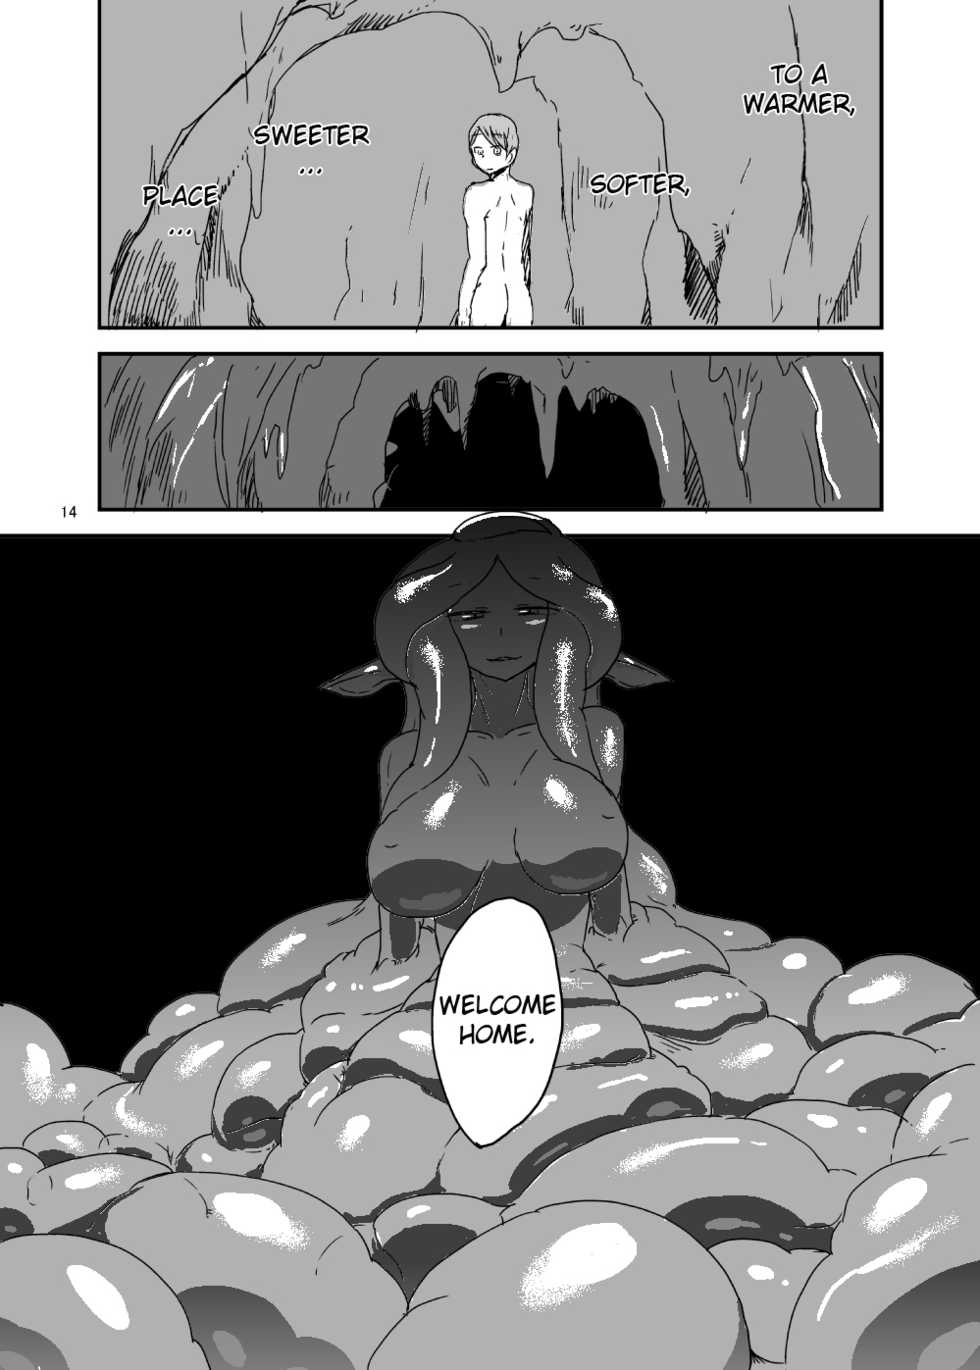 [Setouchi Pharm (Setouchi)] Mon Musu Quest! Beyond The End 2 (Monster Girl Quest!) [English] {OtherSideofSky} [Digital] - Page 13